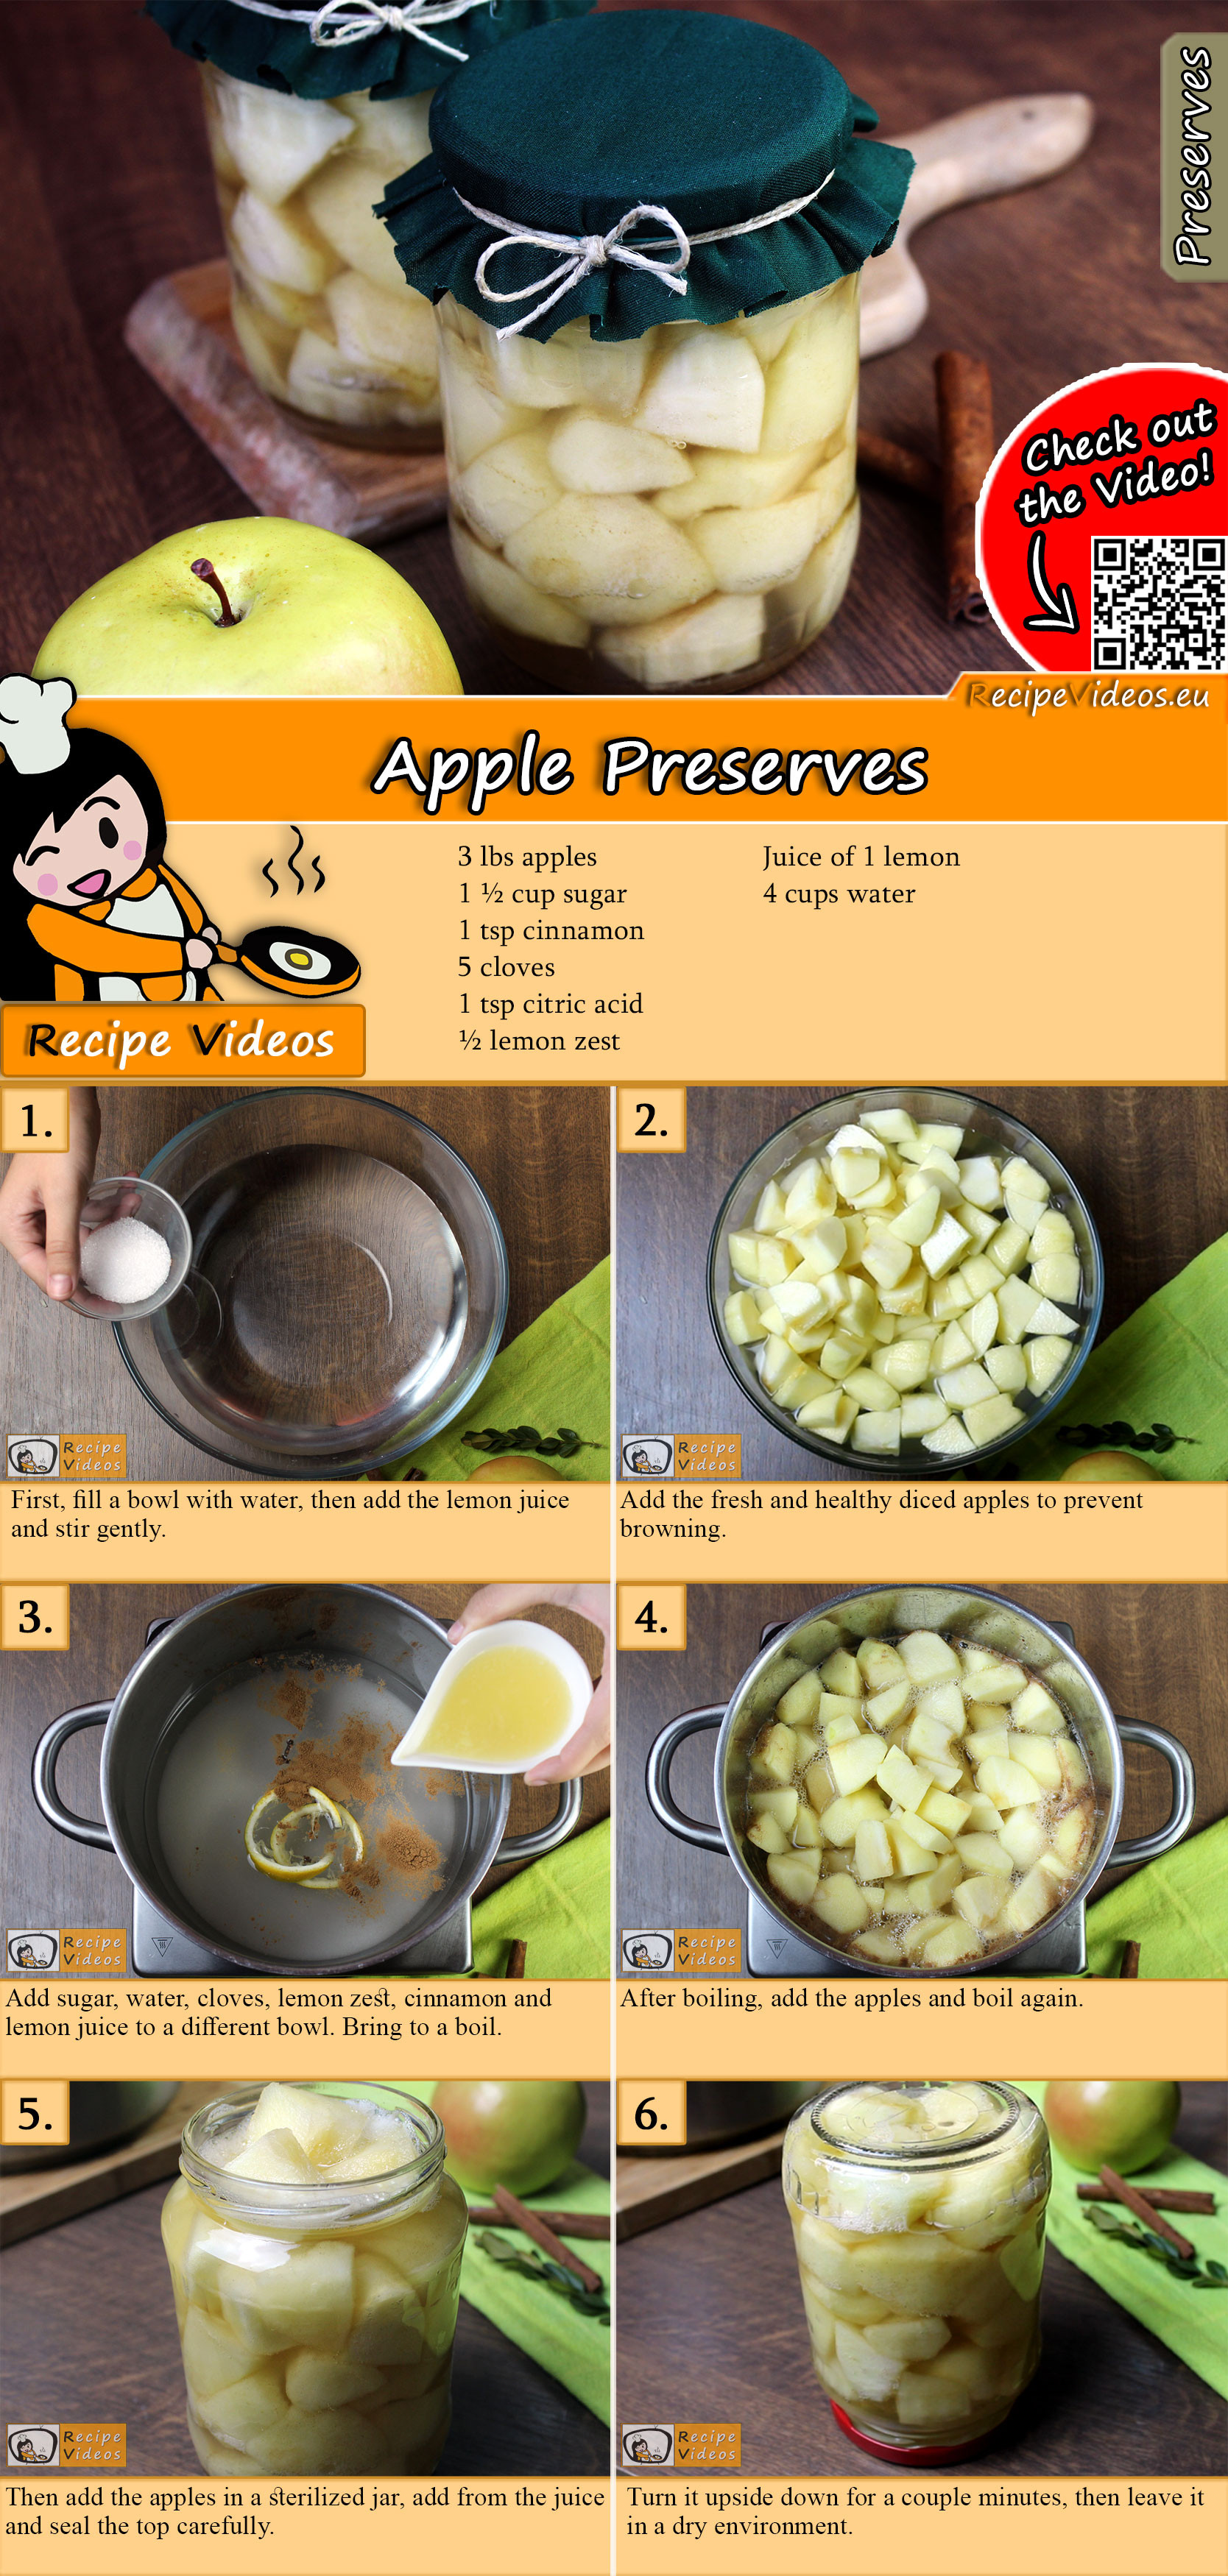 Apple Preserves recipe with video